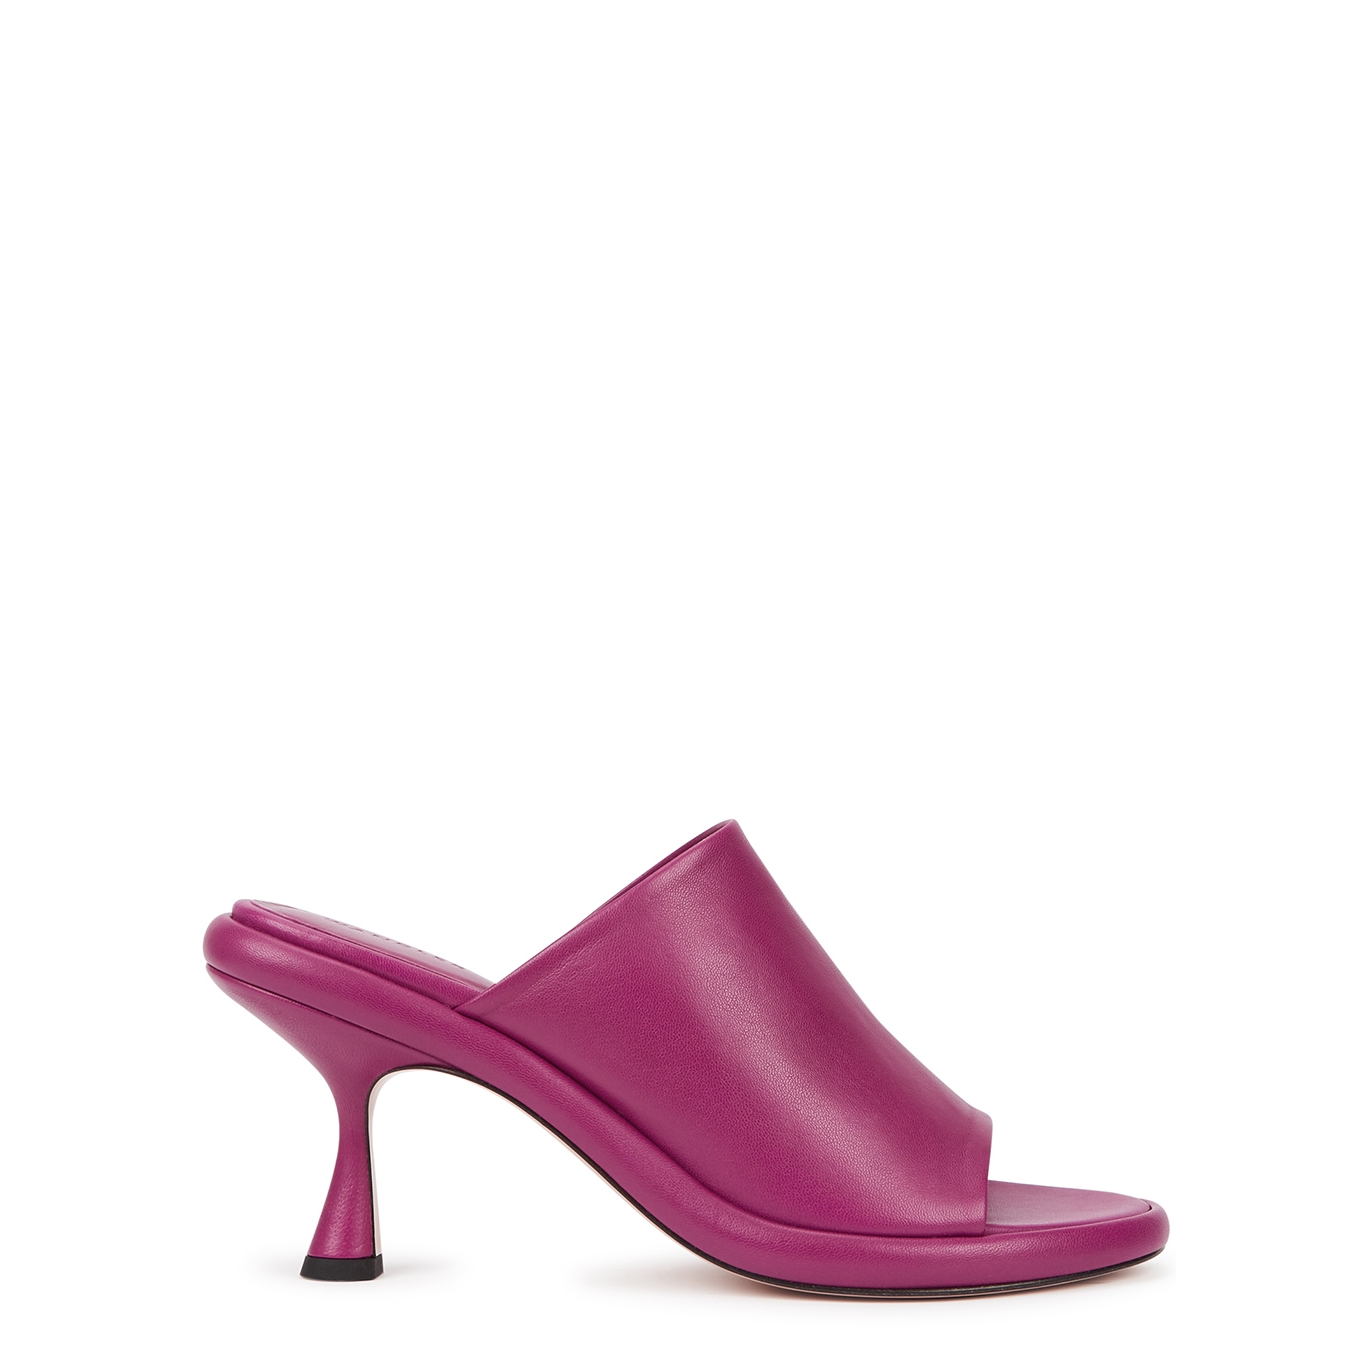 Wandler June 75 Raspberry Leather Mules - Pink - 7